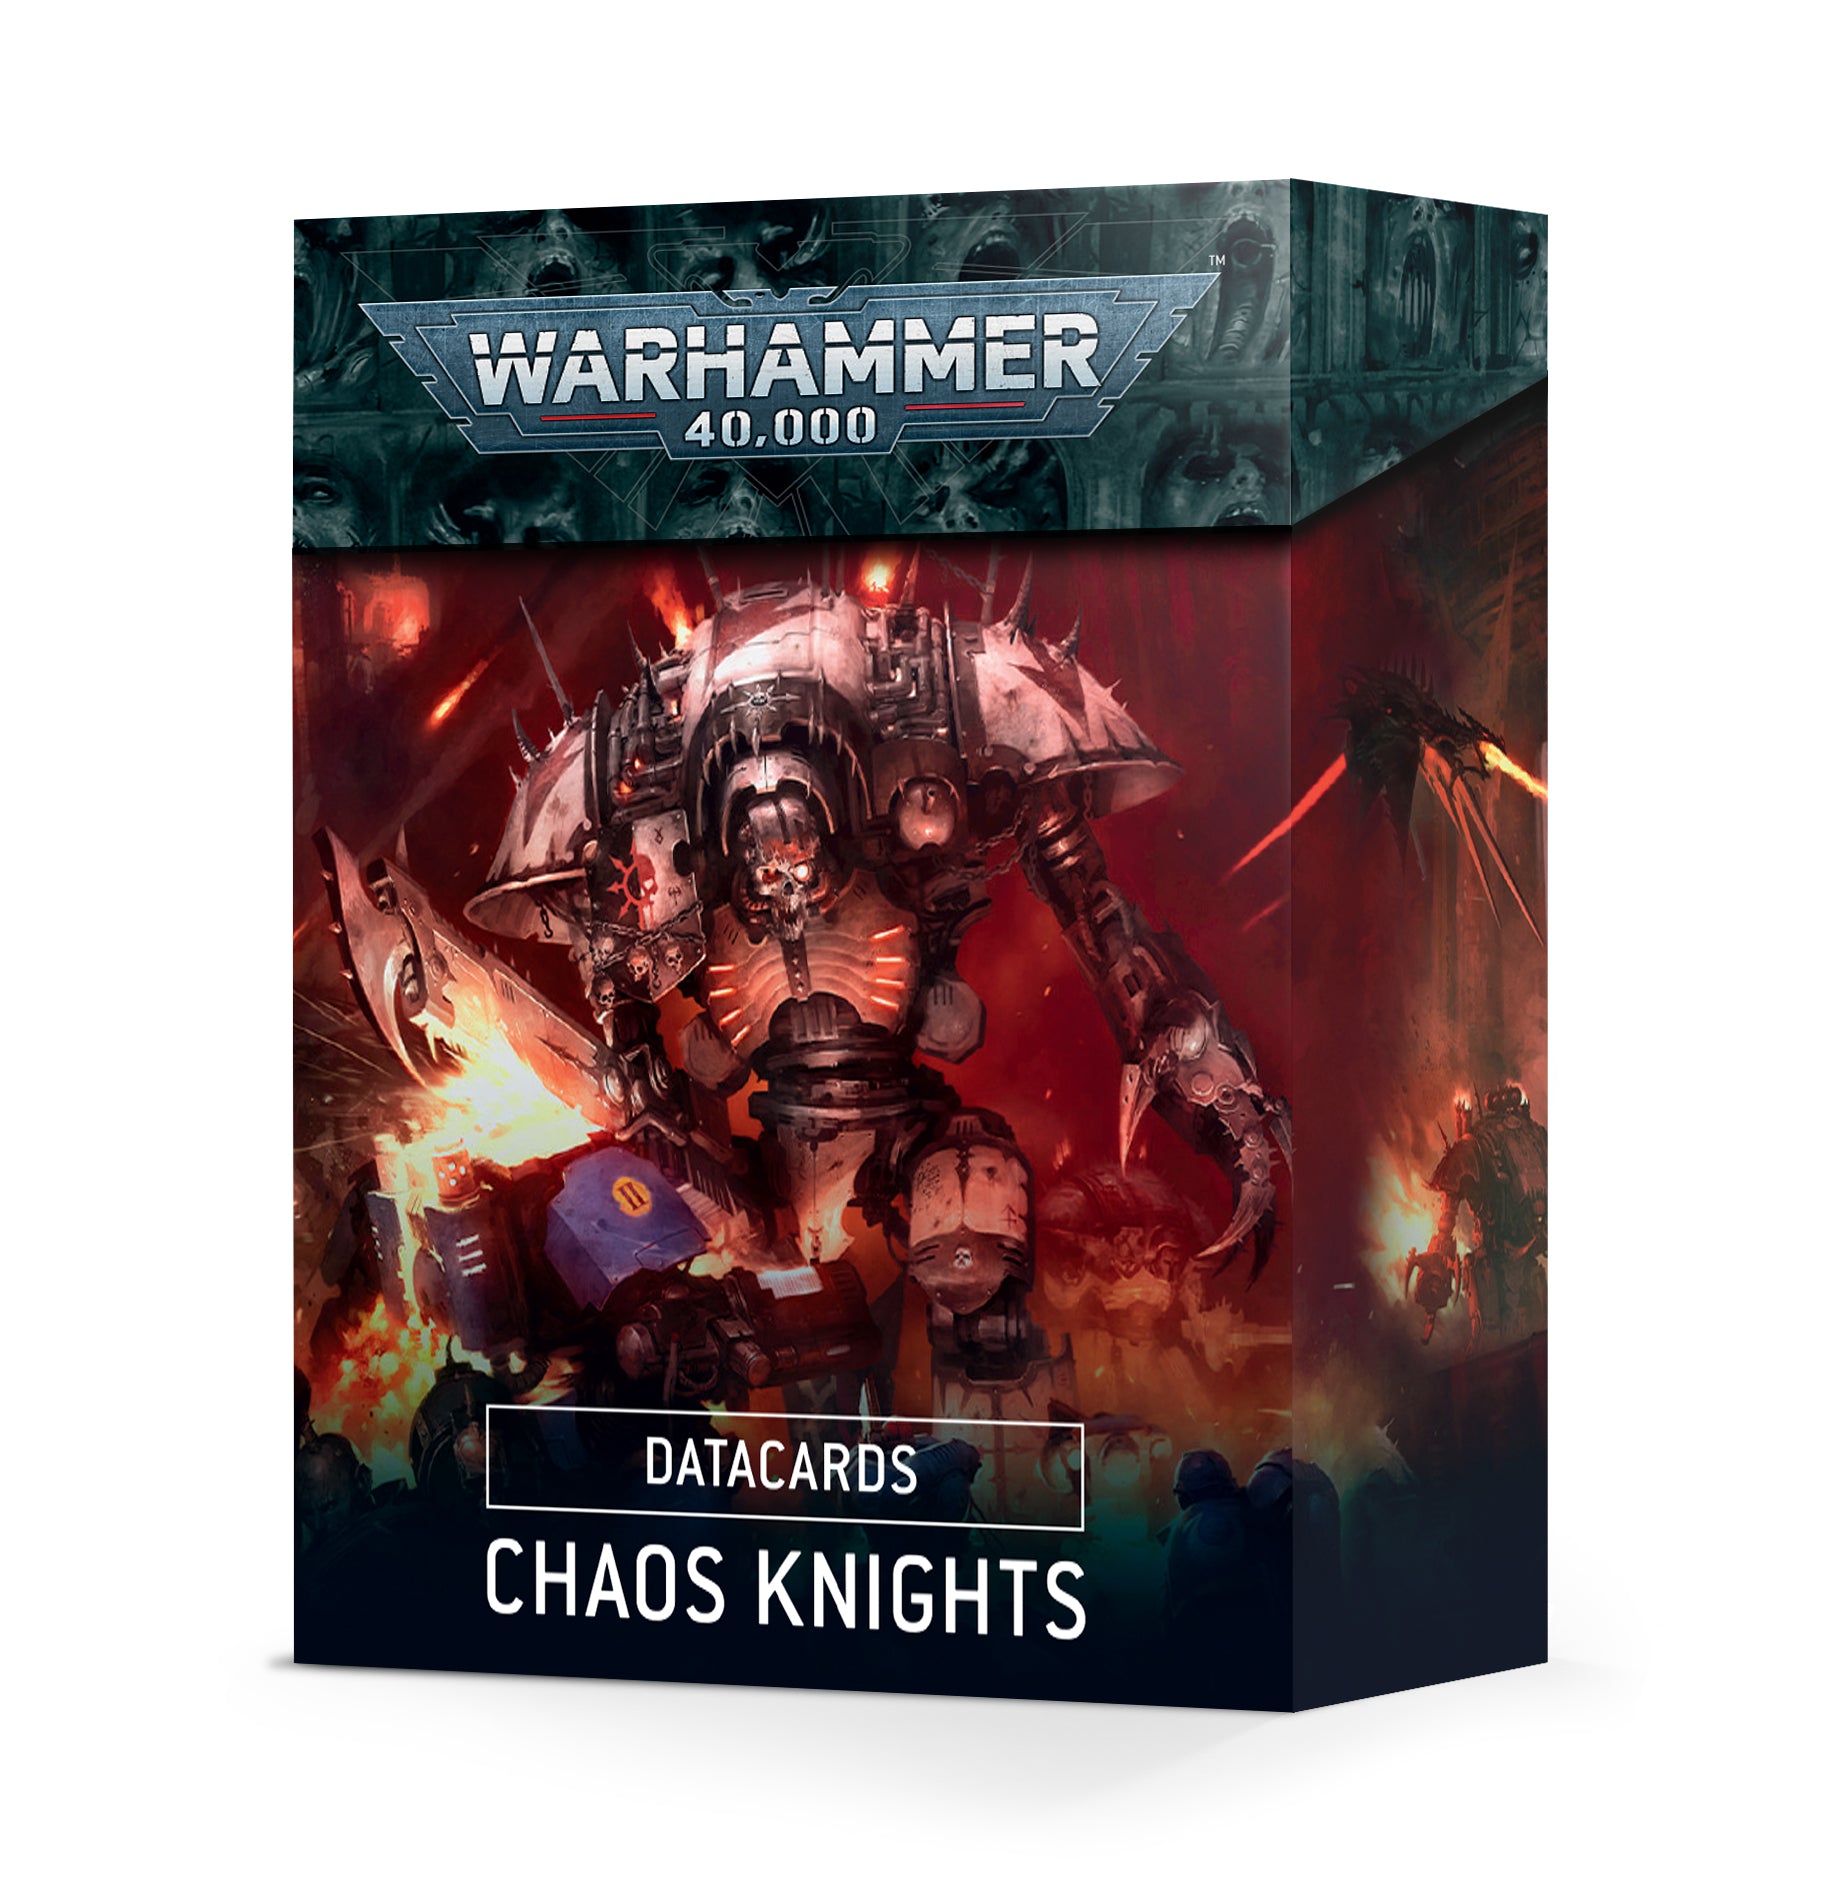 Warhammer 40k Datacards: Chaos Knights - Bards & Cards